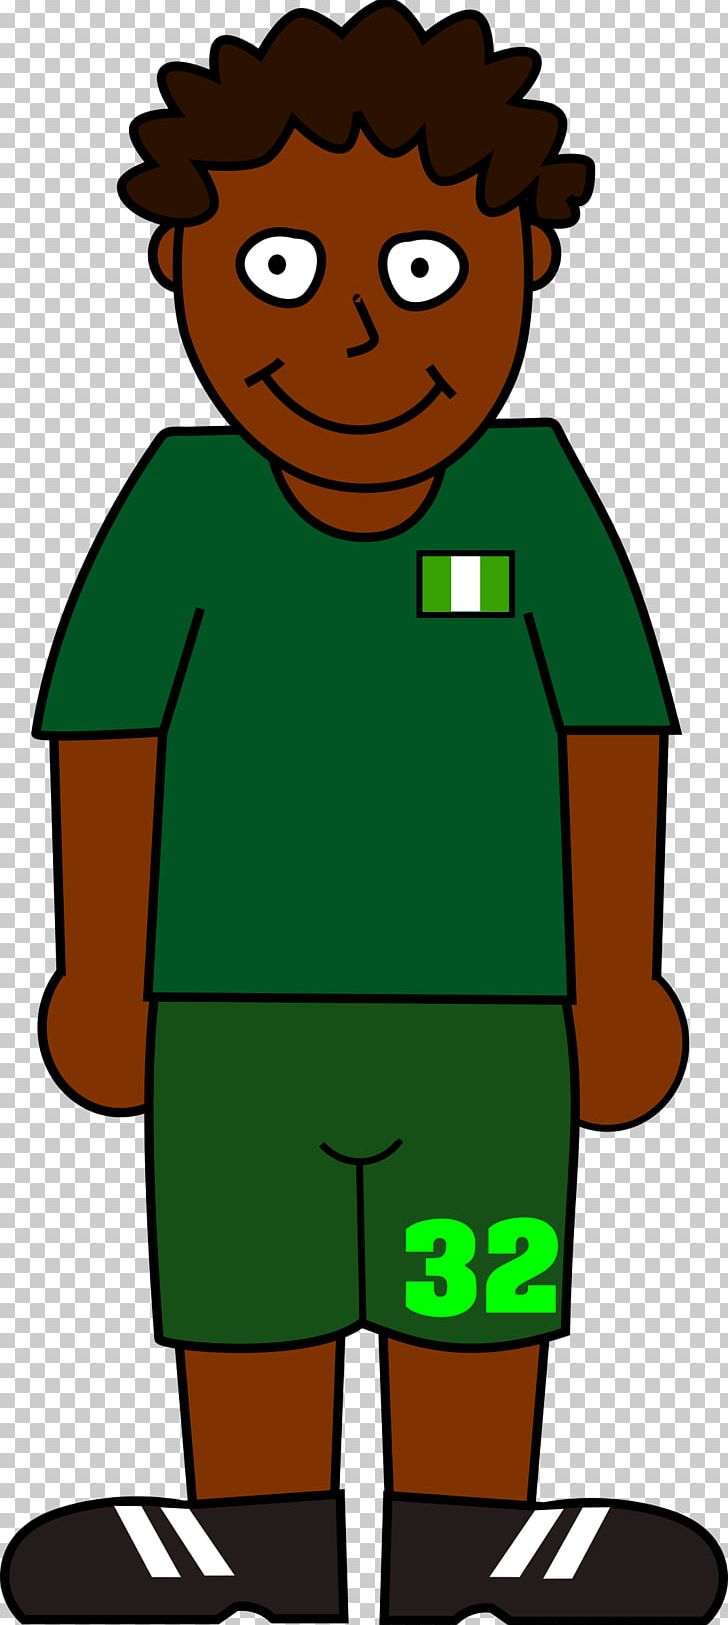 2018 World Cup Argentina National Football Team Senegal National Football Team Saudi Arabia National Football Team PNG, Clipart, Argentina National Football Team, Artwork, Boy, Fictional Character, Football Player Free PNG Download